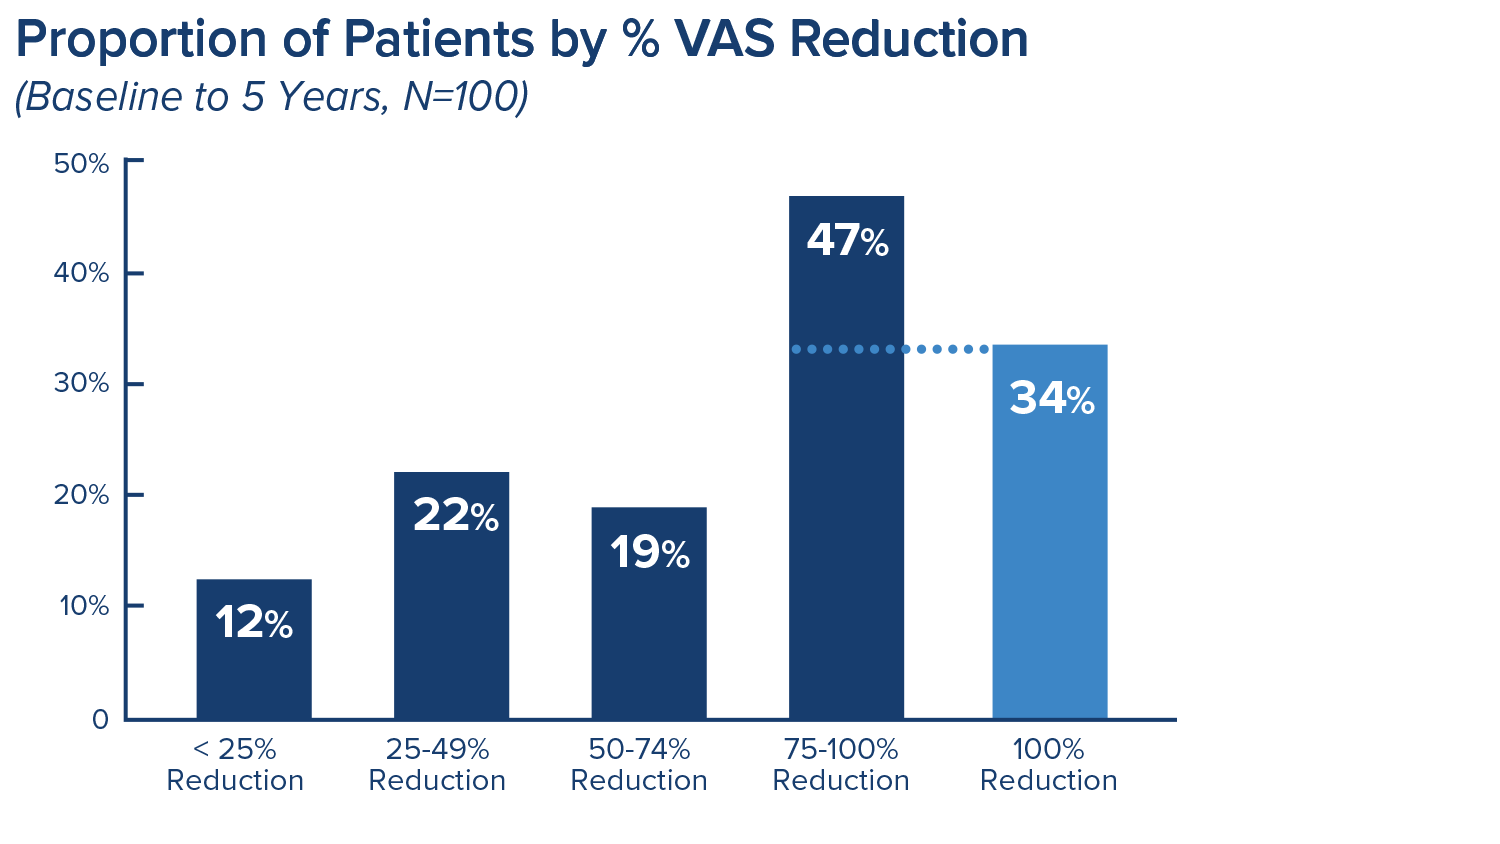 Proportion of patients by % VAS reduction